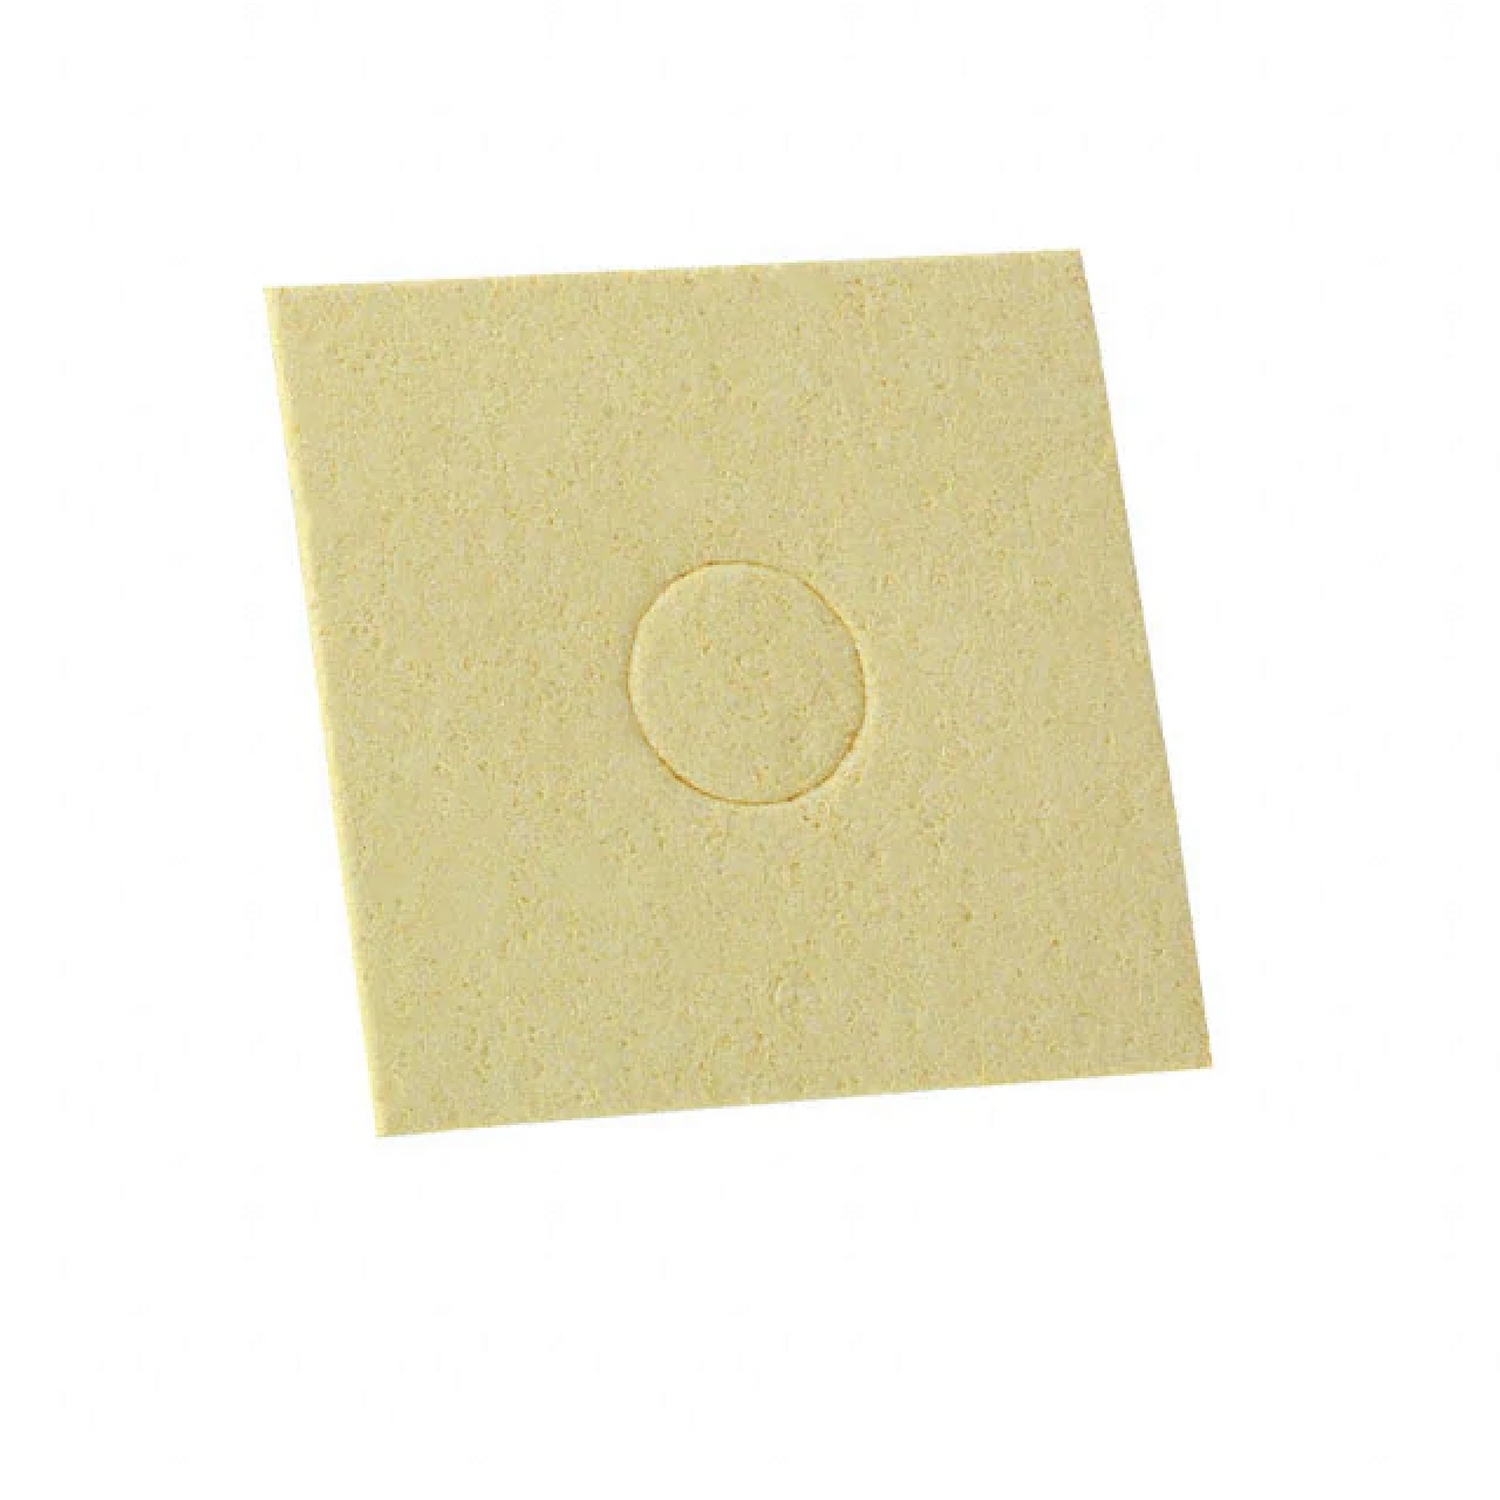 Hakko cleaning sponge A1042 wet sponge to clean off soldering iron solder residue after use to prevent oxidisation